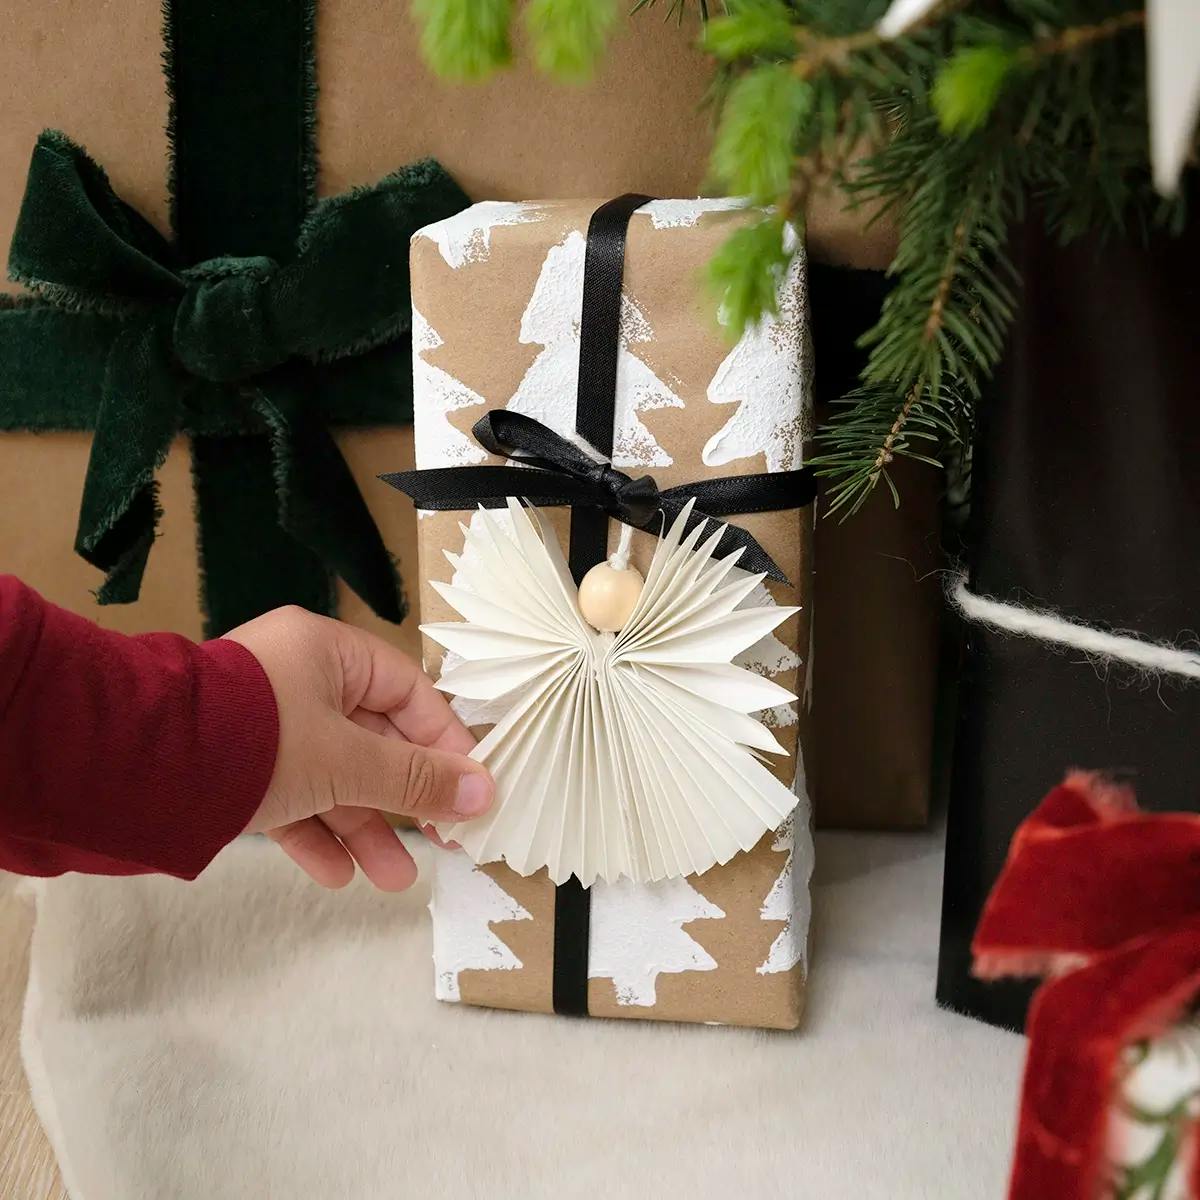 A hand pacing a gift under a Christmas tree. The gift is wrapped in custom Christmas wrapping paper made with e DIY stamp, and decorated with an angel ornament.